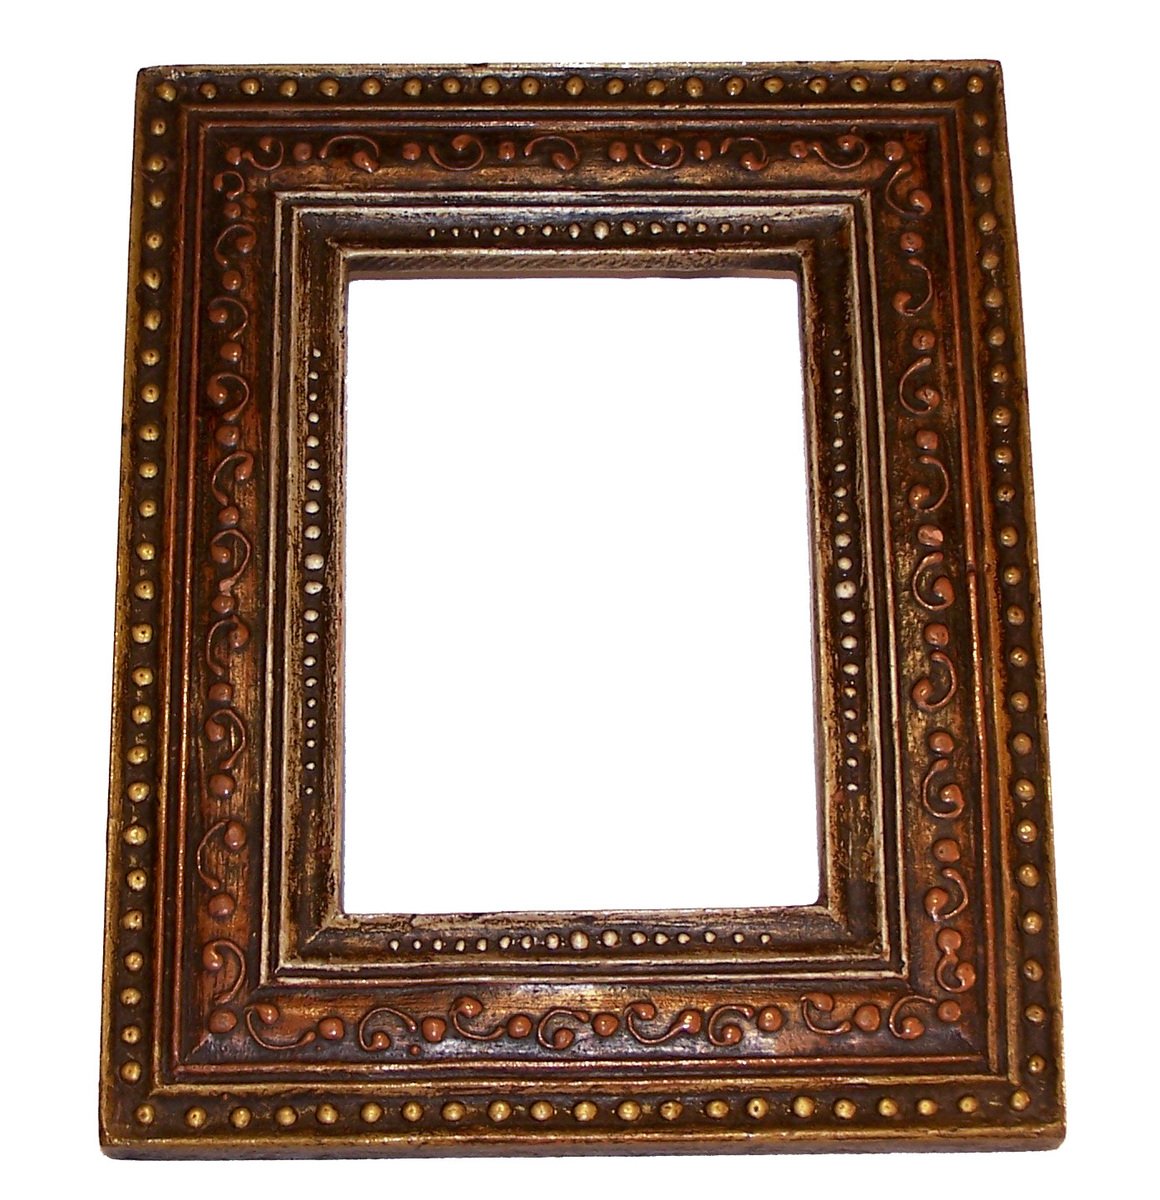 an antique metal frame on a white background